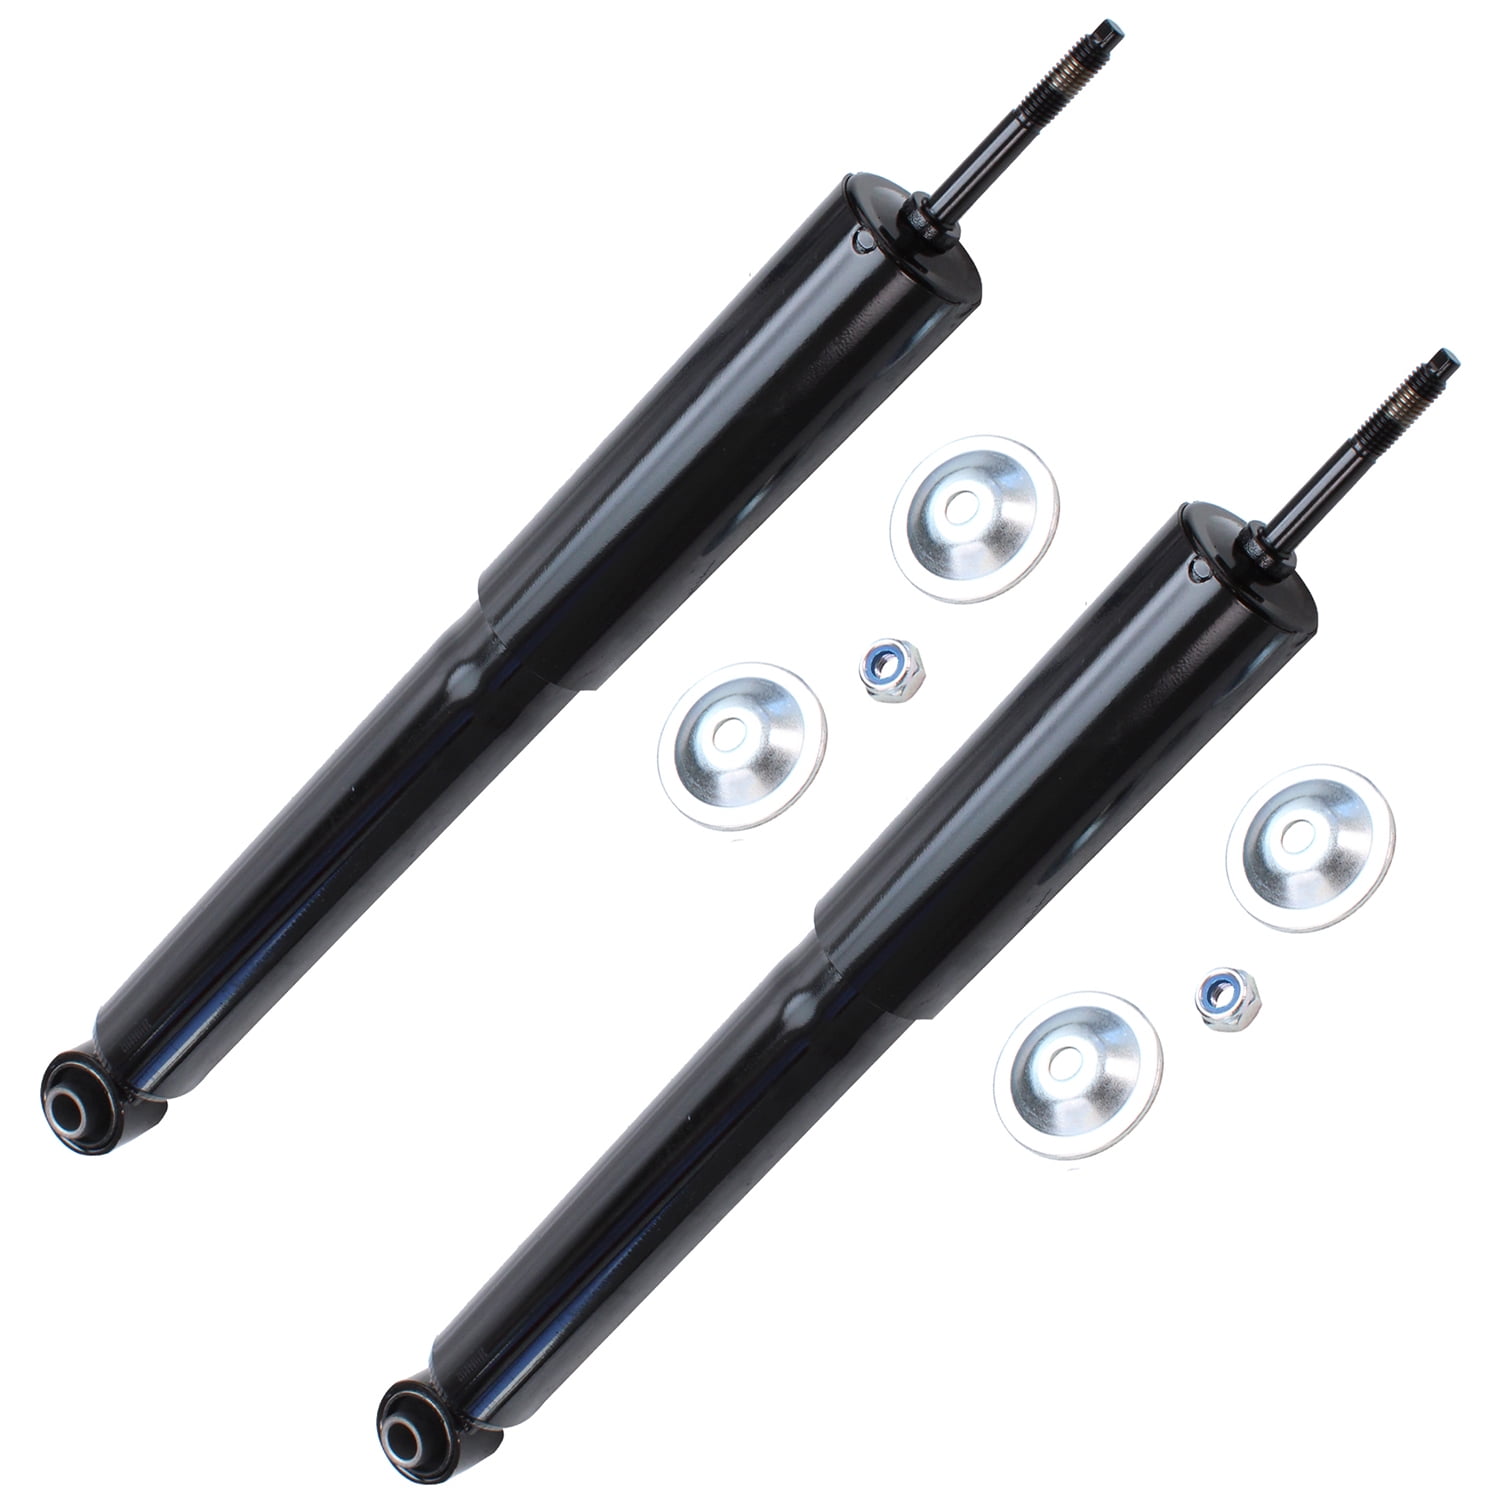 Rough Country 3.5-4.5" N3 Rear Shocks for Chevy/GMC Half-Ton Pickup 23274_W 